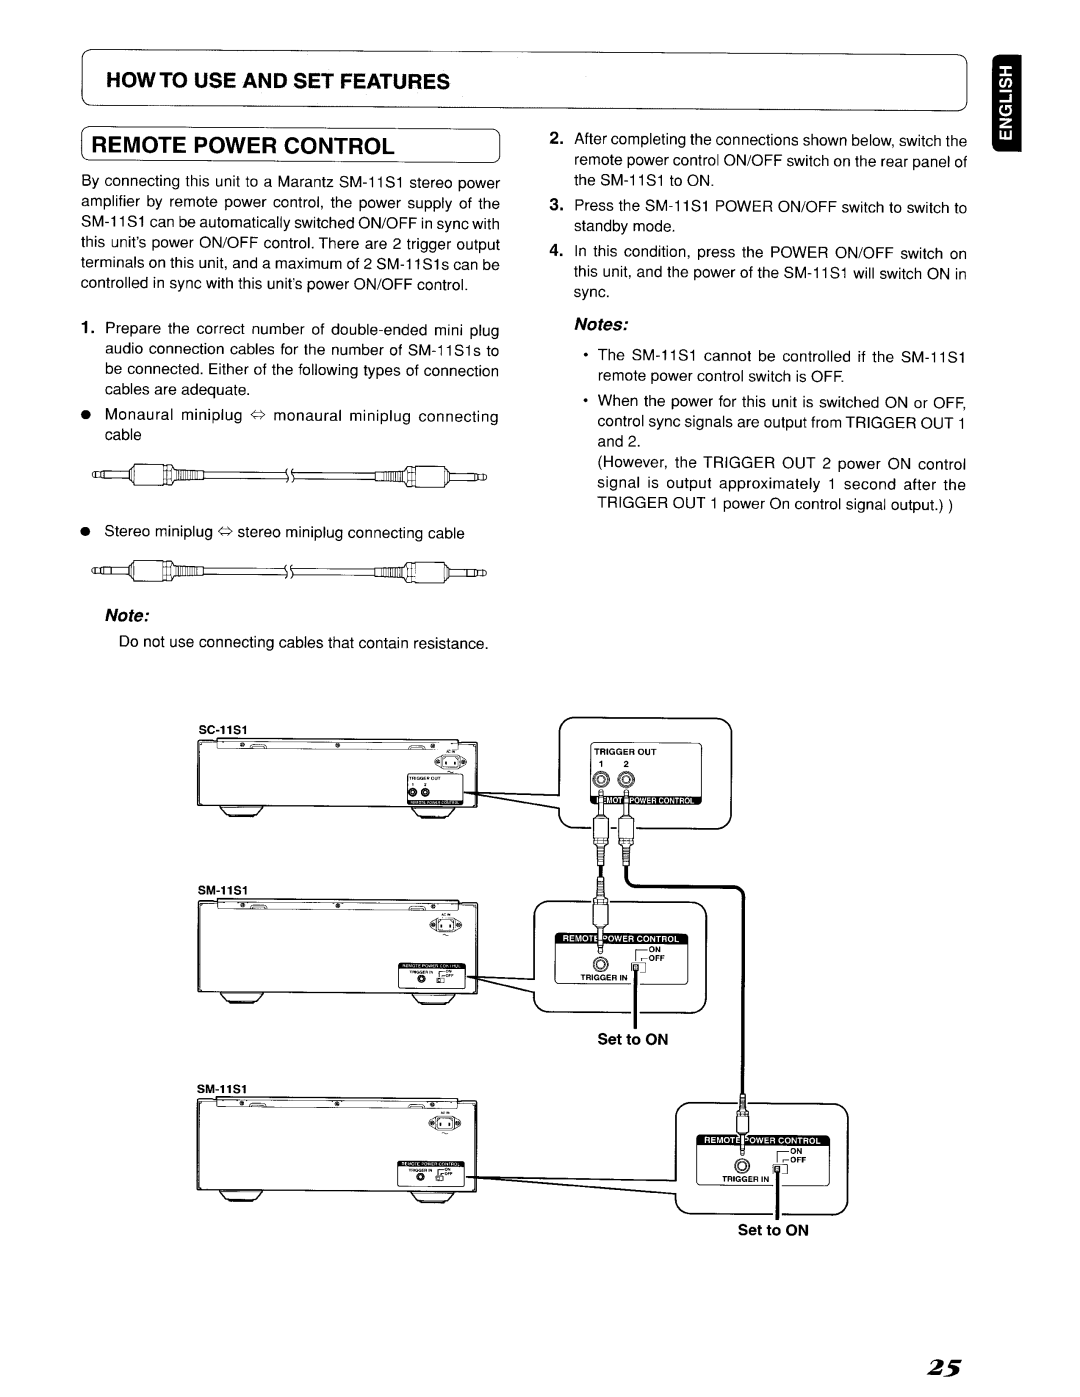 Marantz SC-11S1, 642SC11S1 manual ~oo·l~, Remote Power Control, Howto Use And Set Features, ~g~F, ~~-c····· 